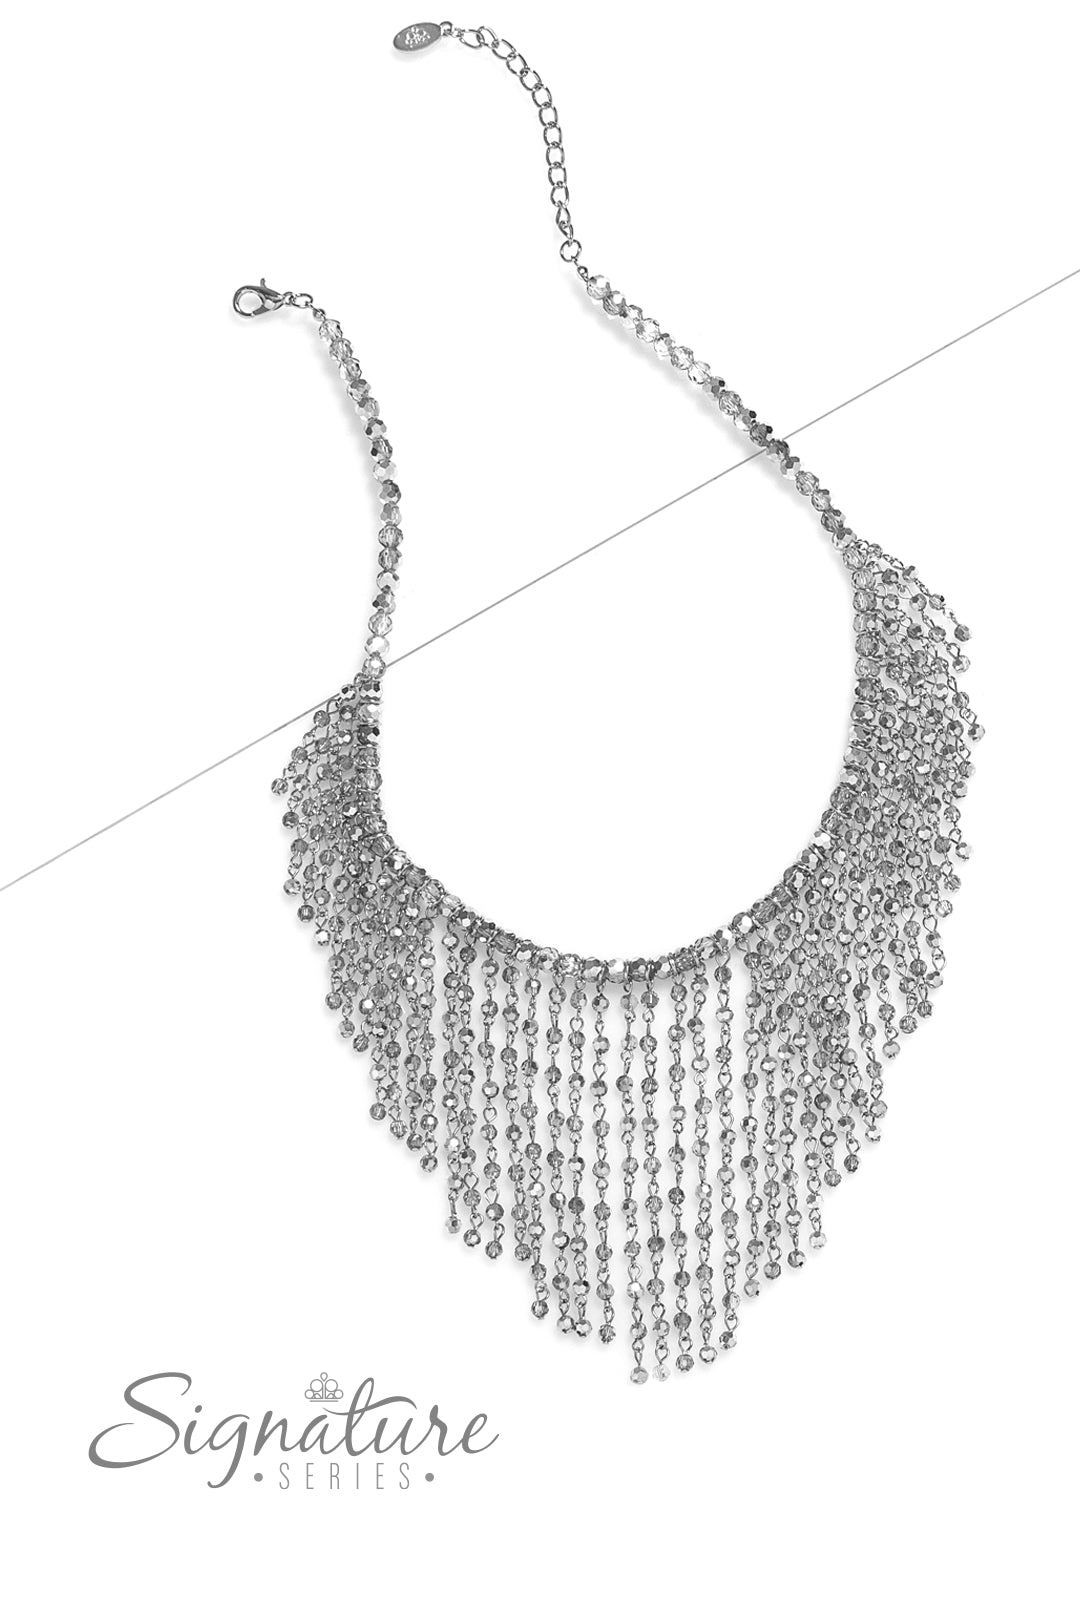 Paparazzi Accessories The Stephanie A collection of small, faceted beads is threaded along an invisible wire, showcasing their irresistible metallic shimmer and range of opacities. Dainty silver chain links, dotted with more of the same faceted beads, dri